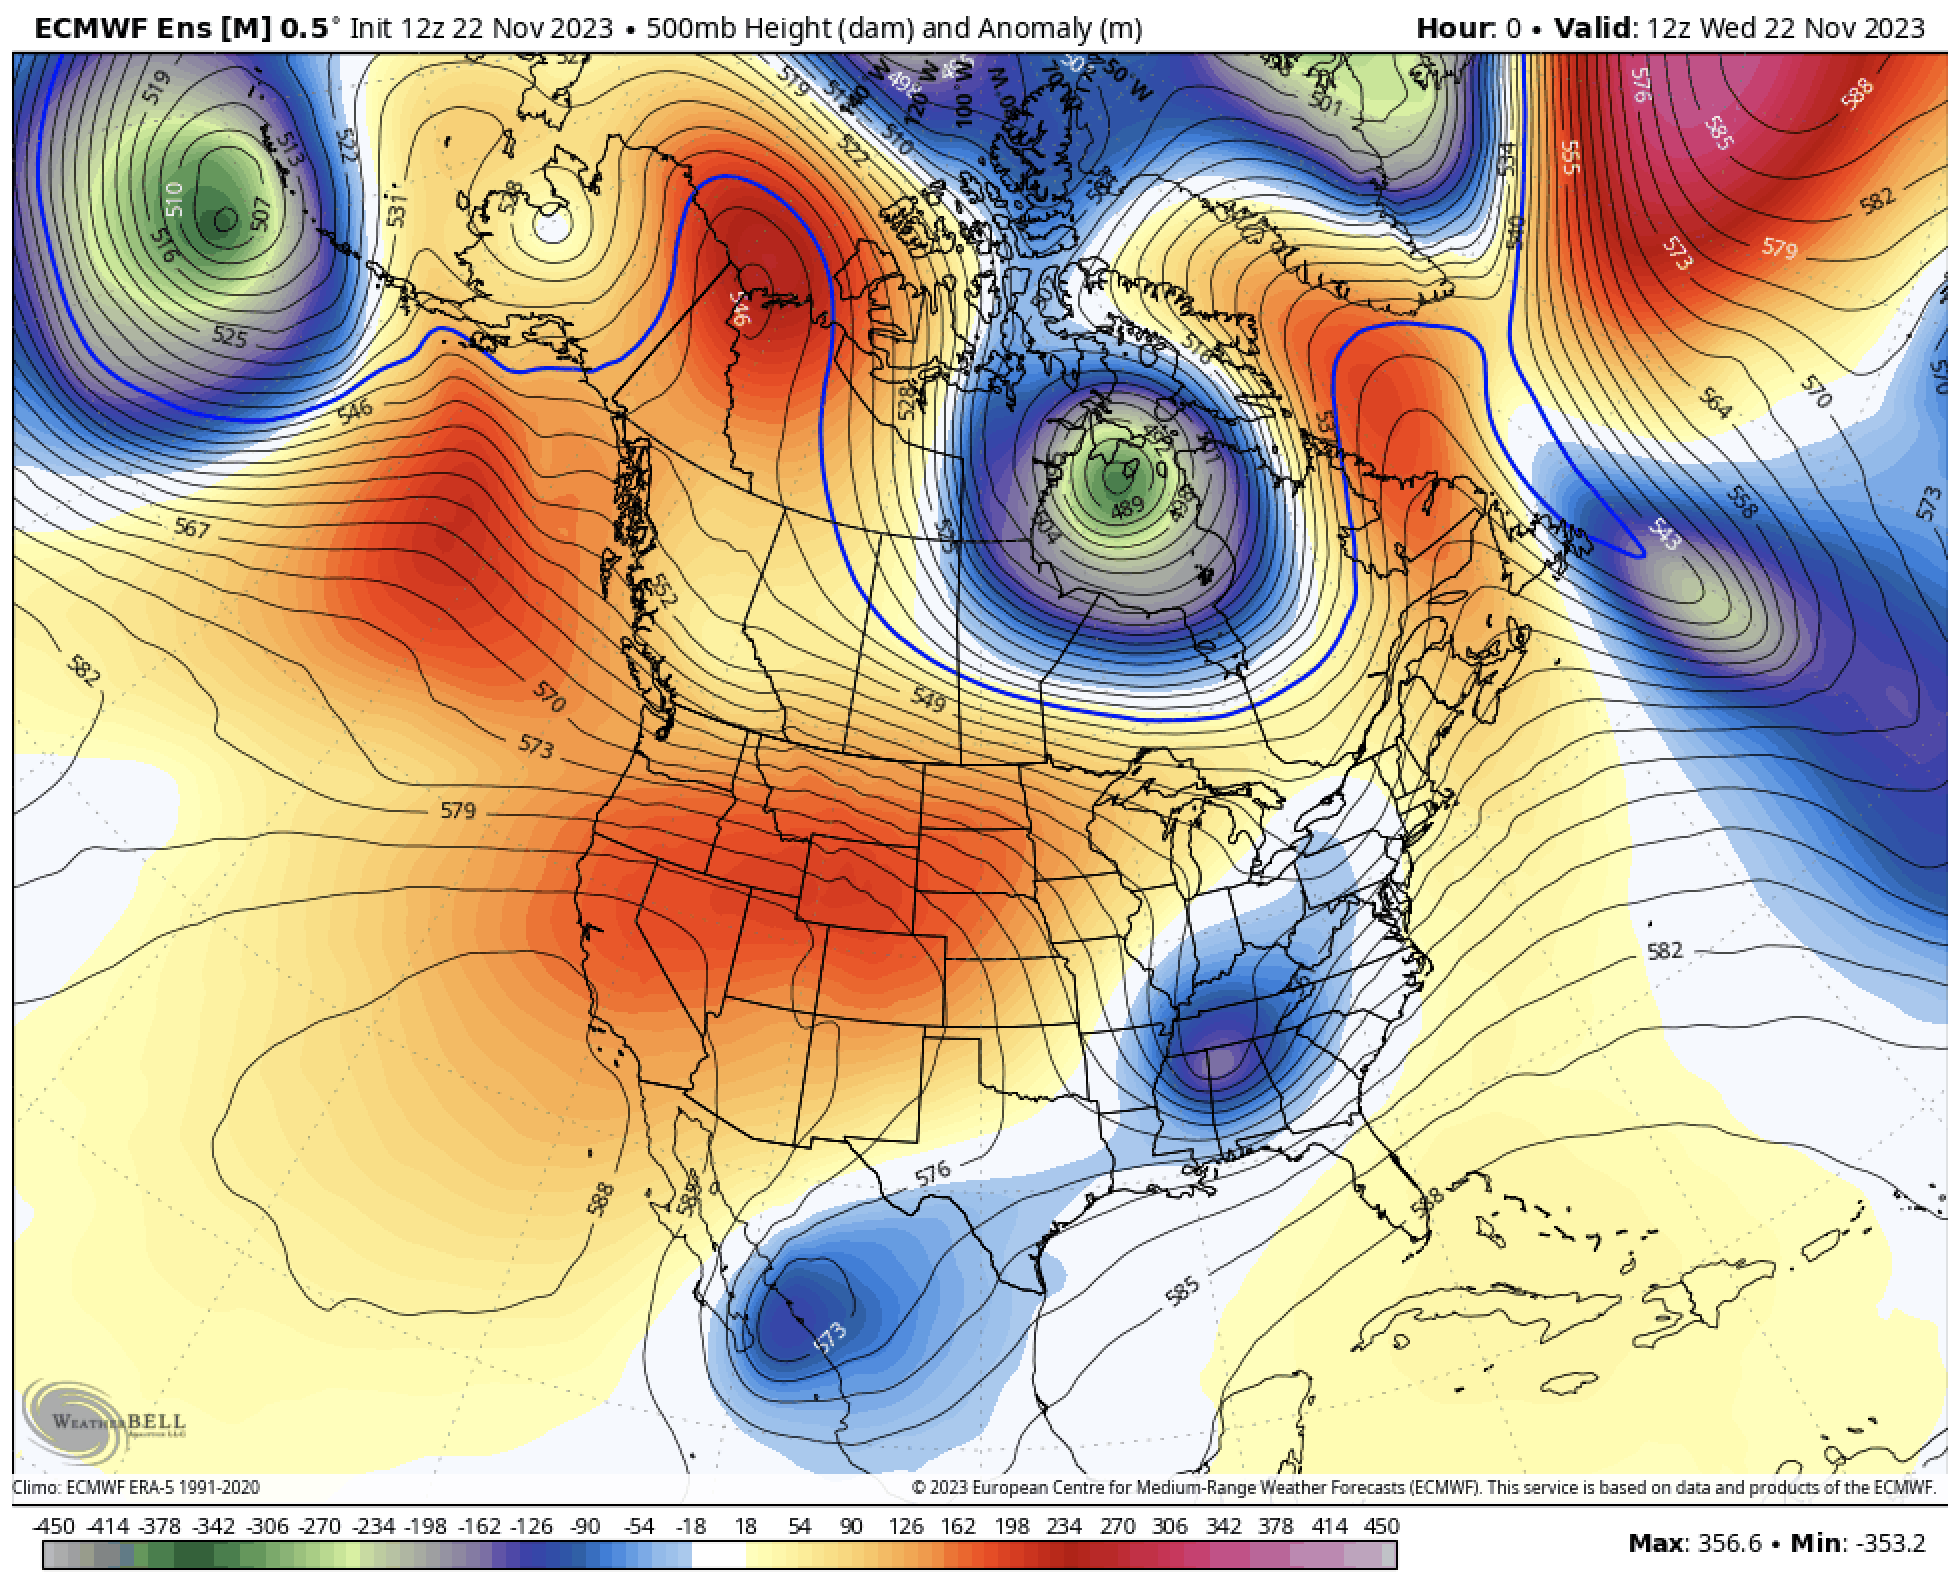 500 MB Height and Anomaly - Mammoth Weather Image